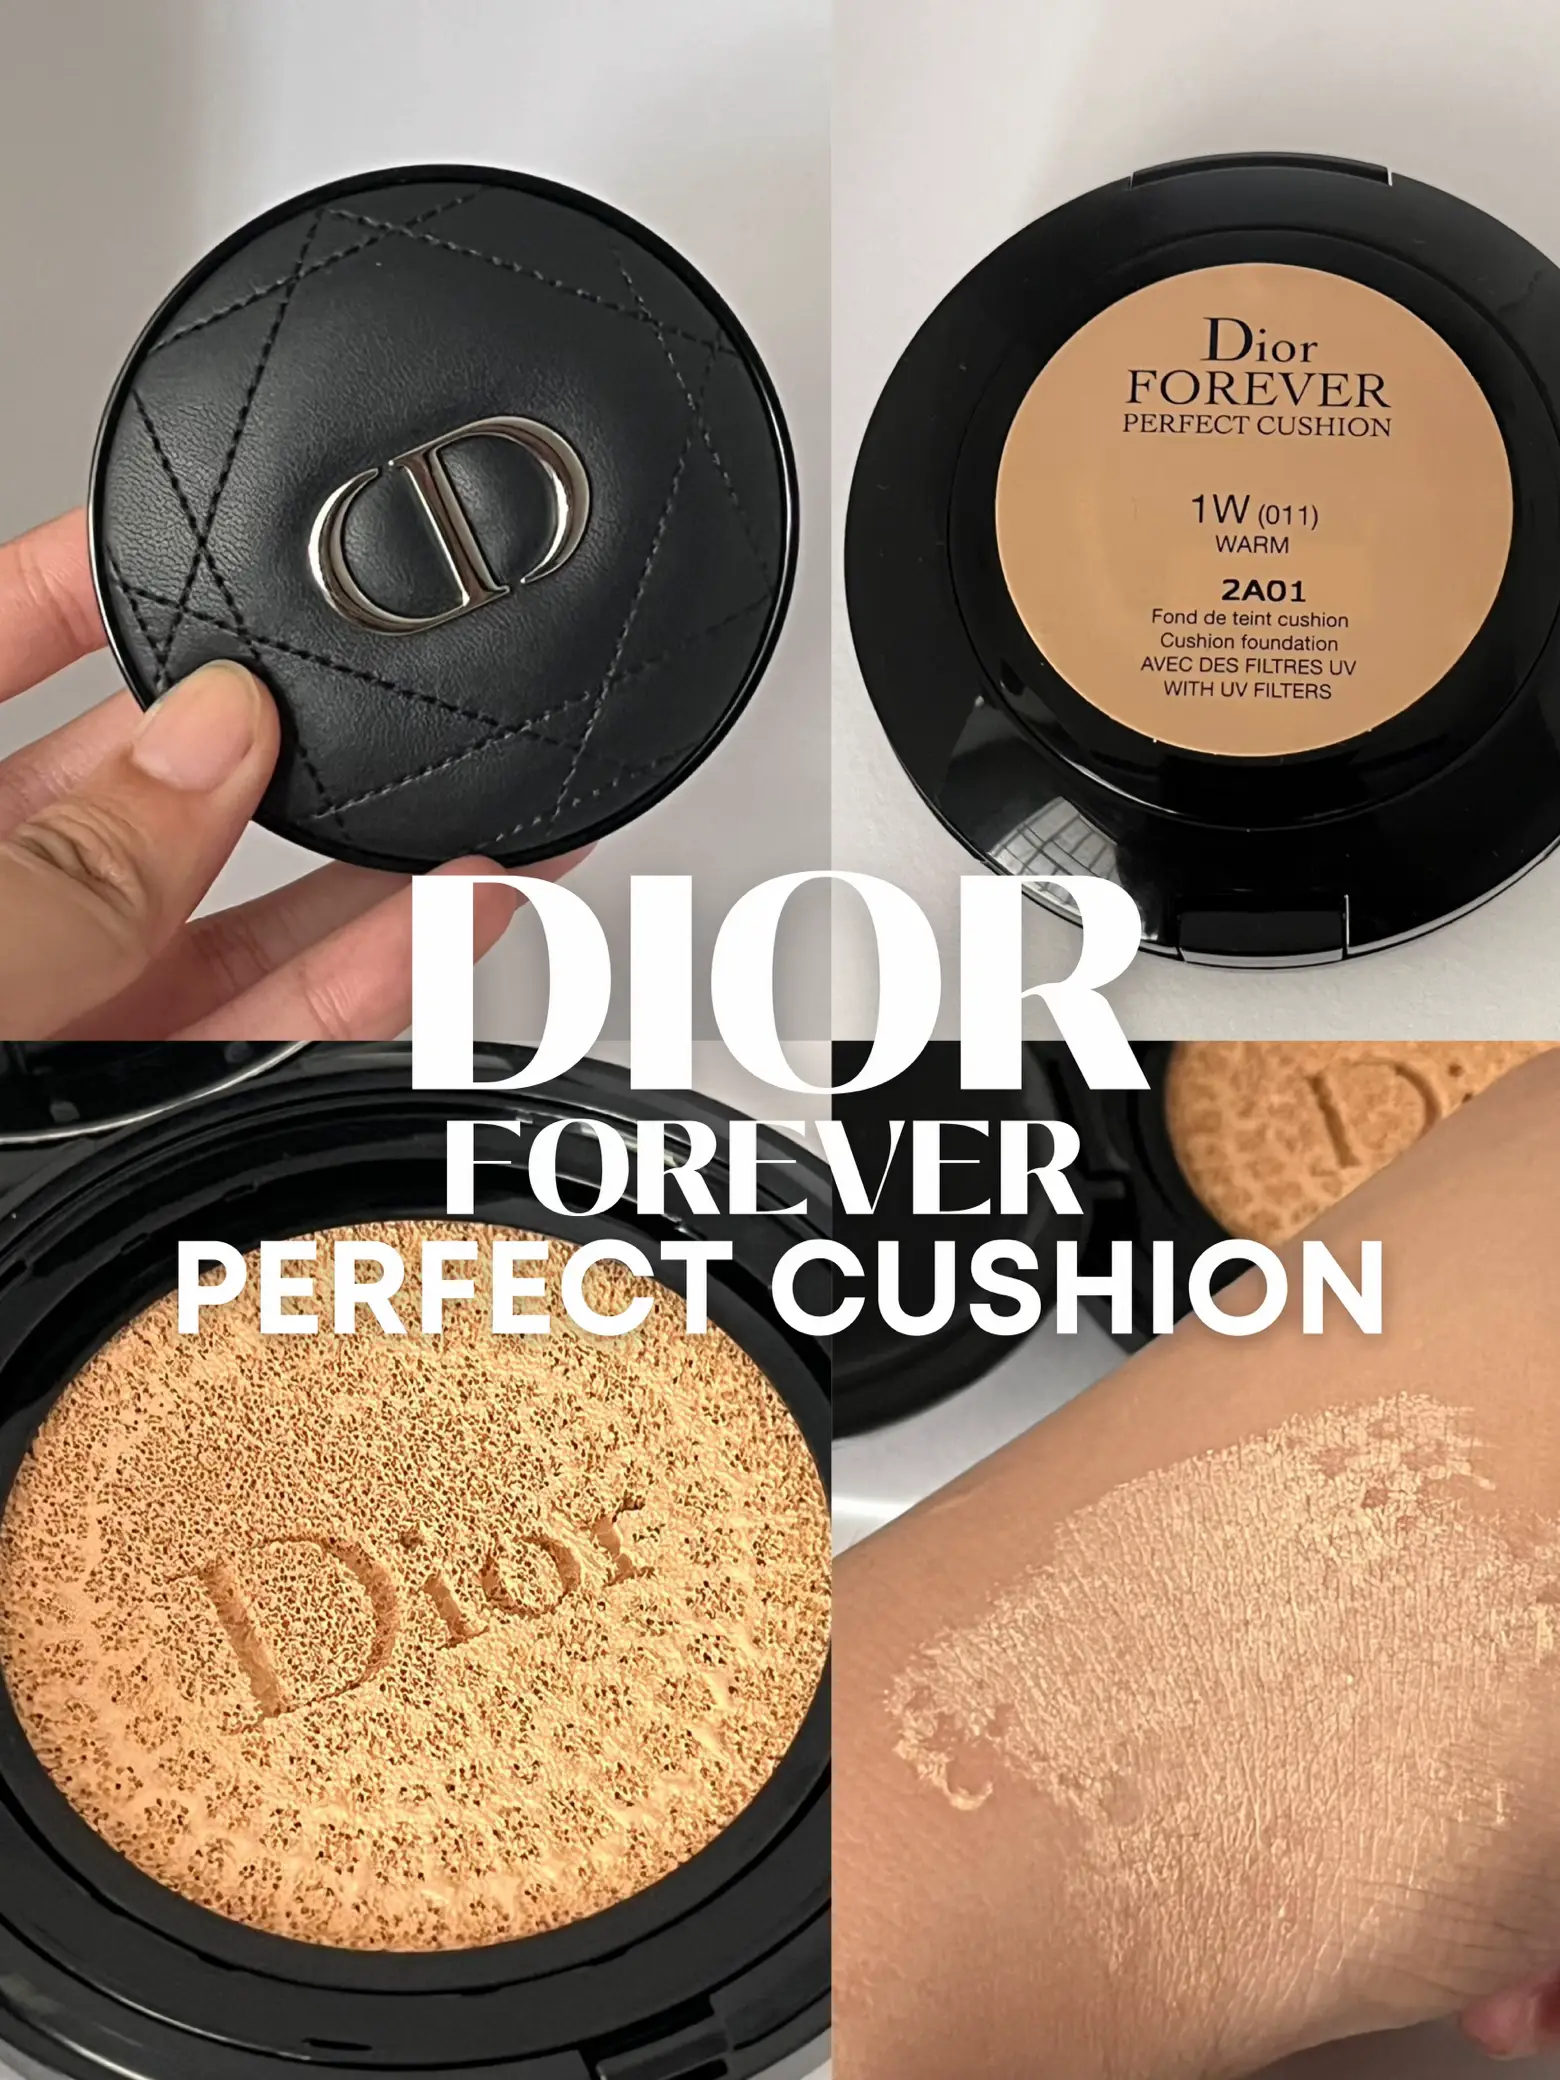 Dior FOREVER PERFECT CUSHION